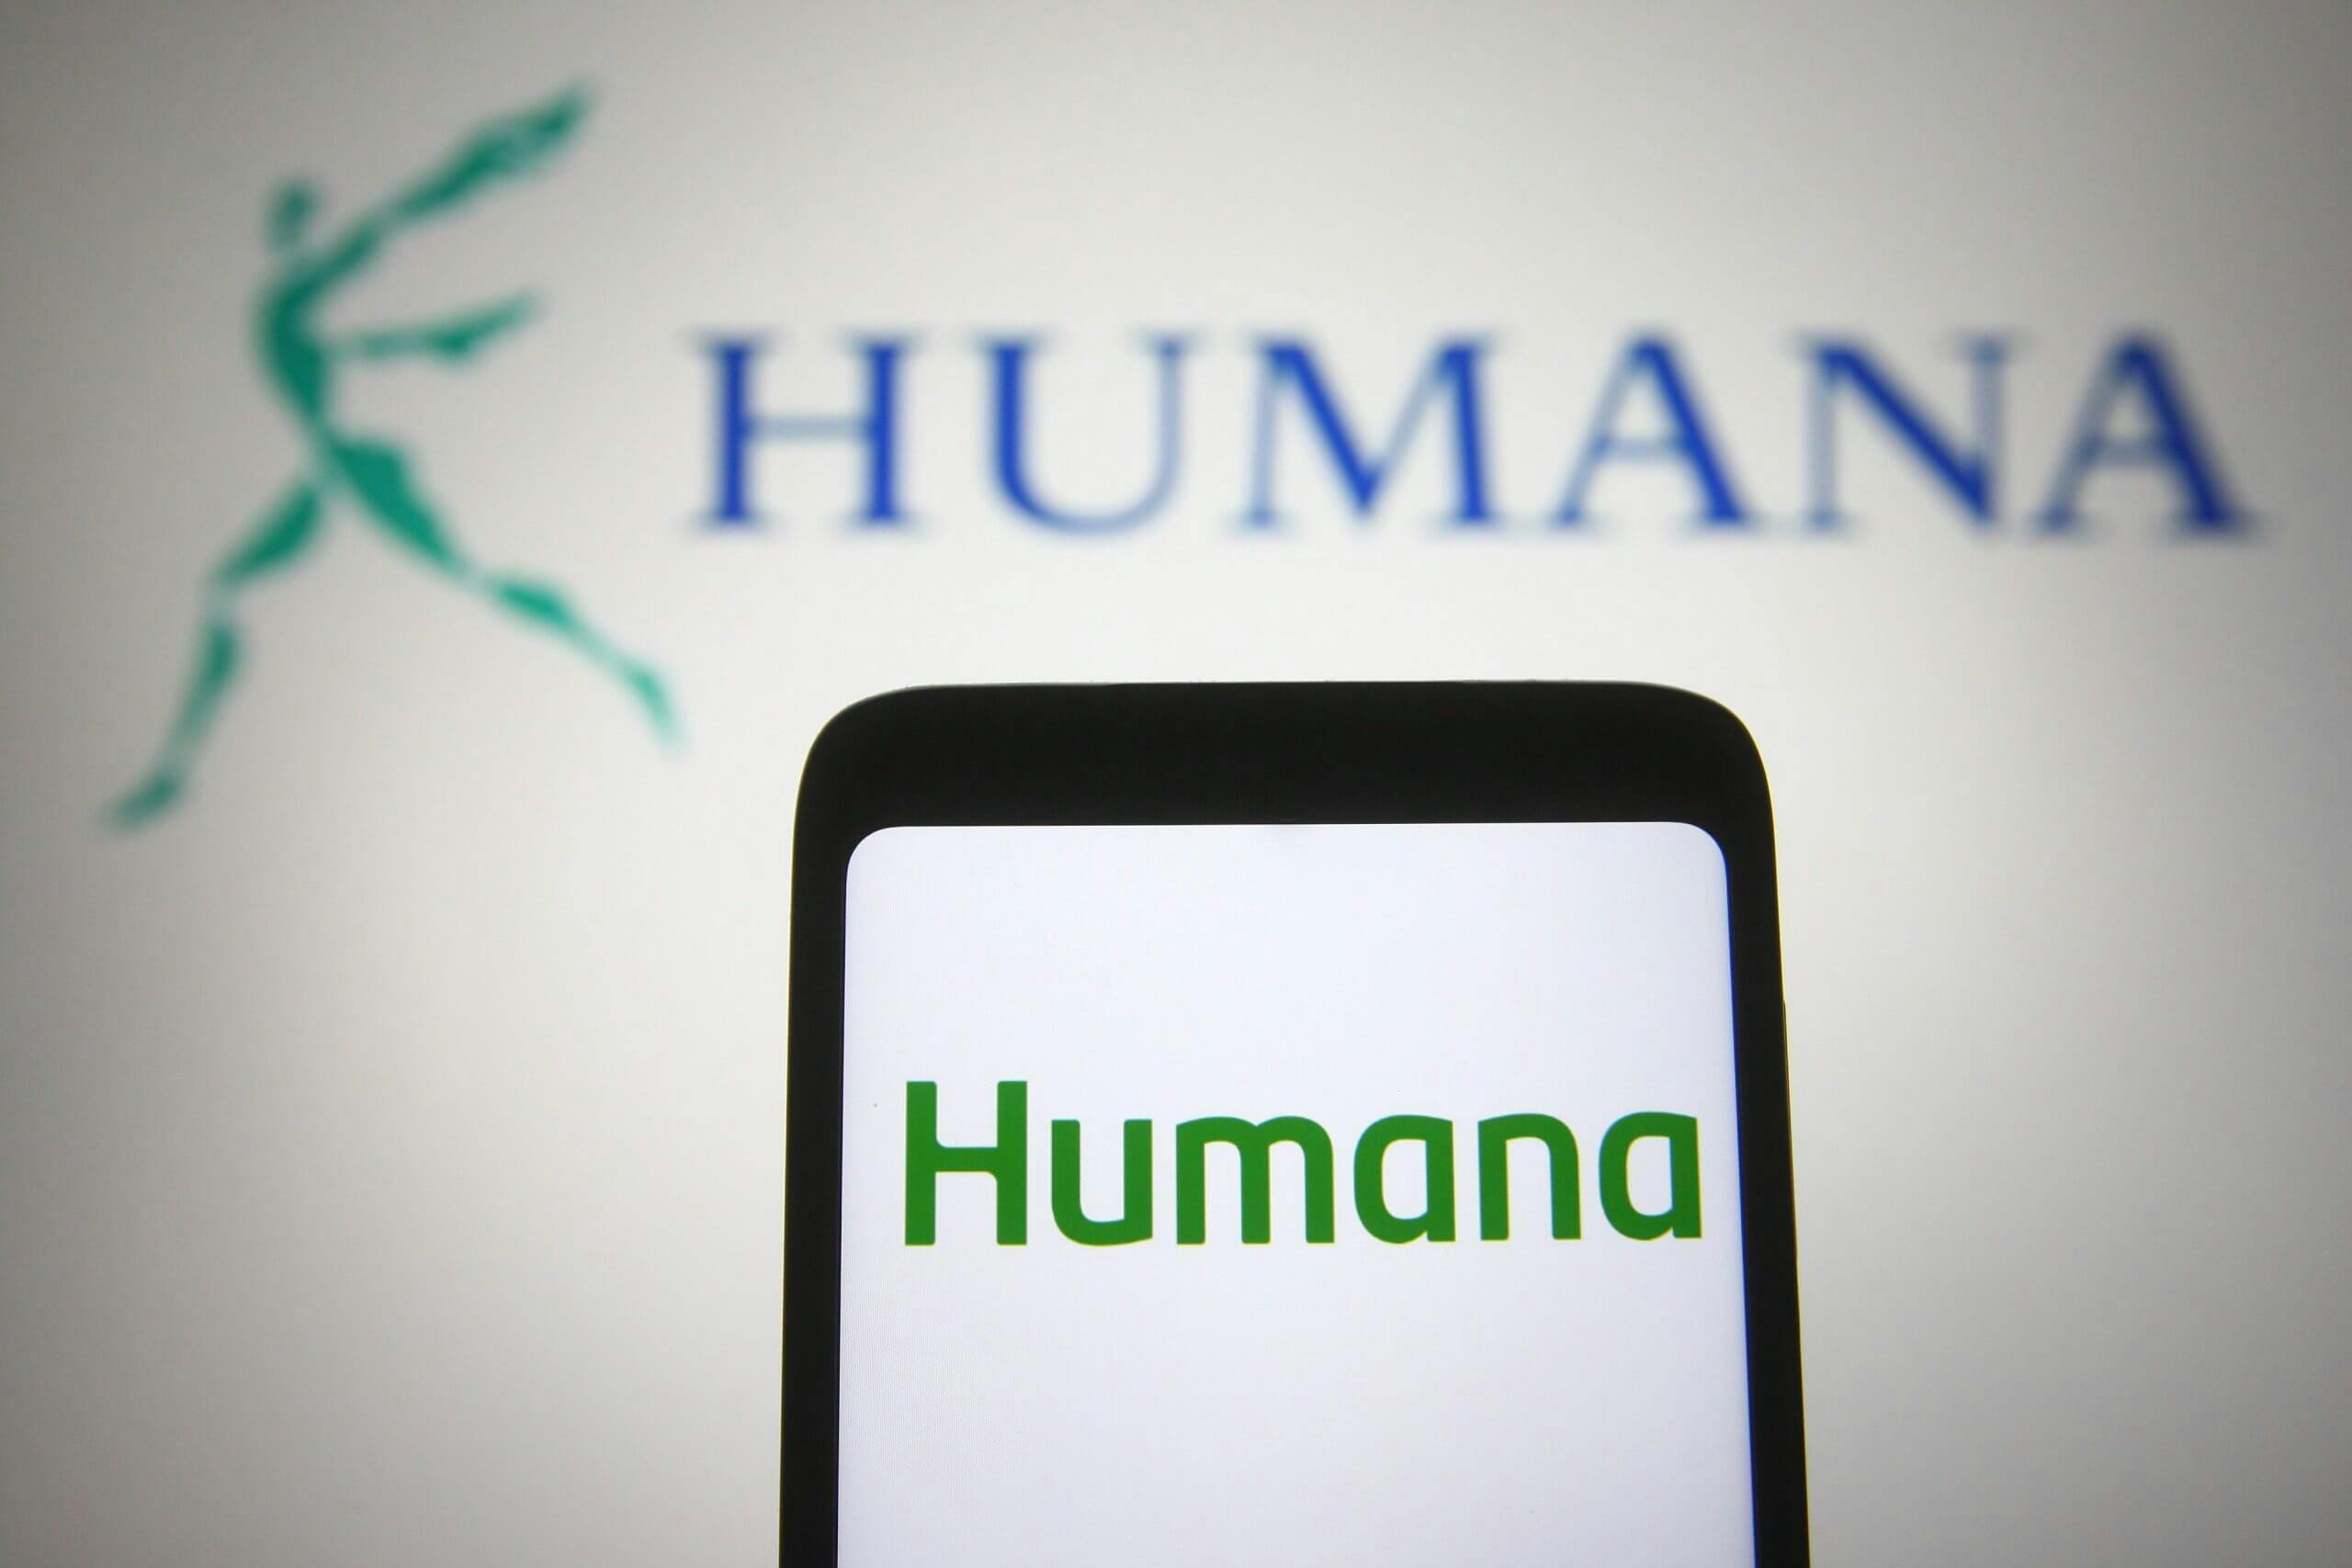 Treatment Covered by Humana